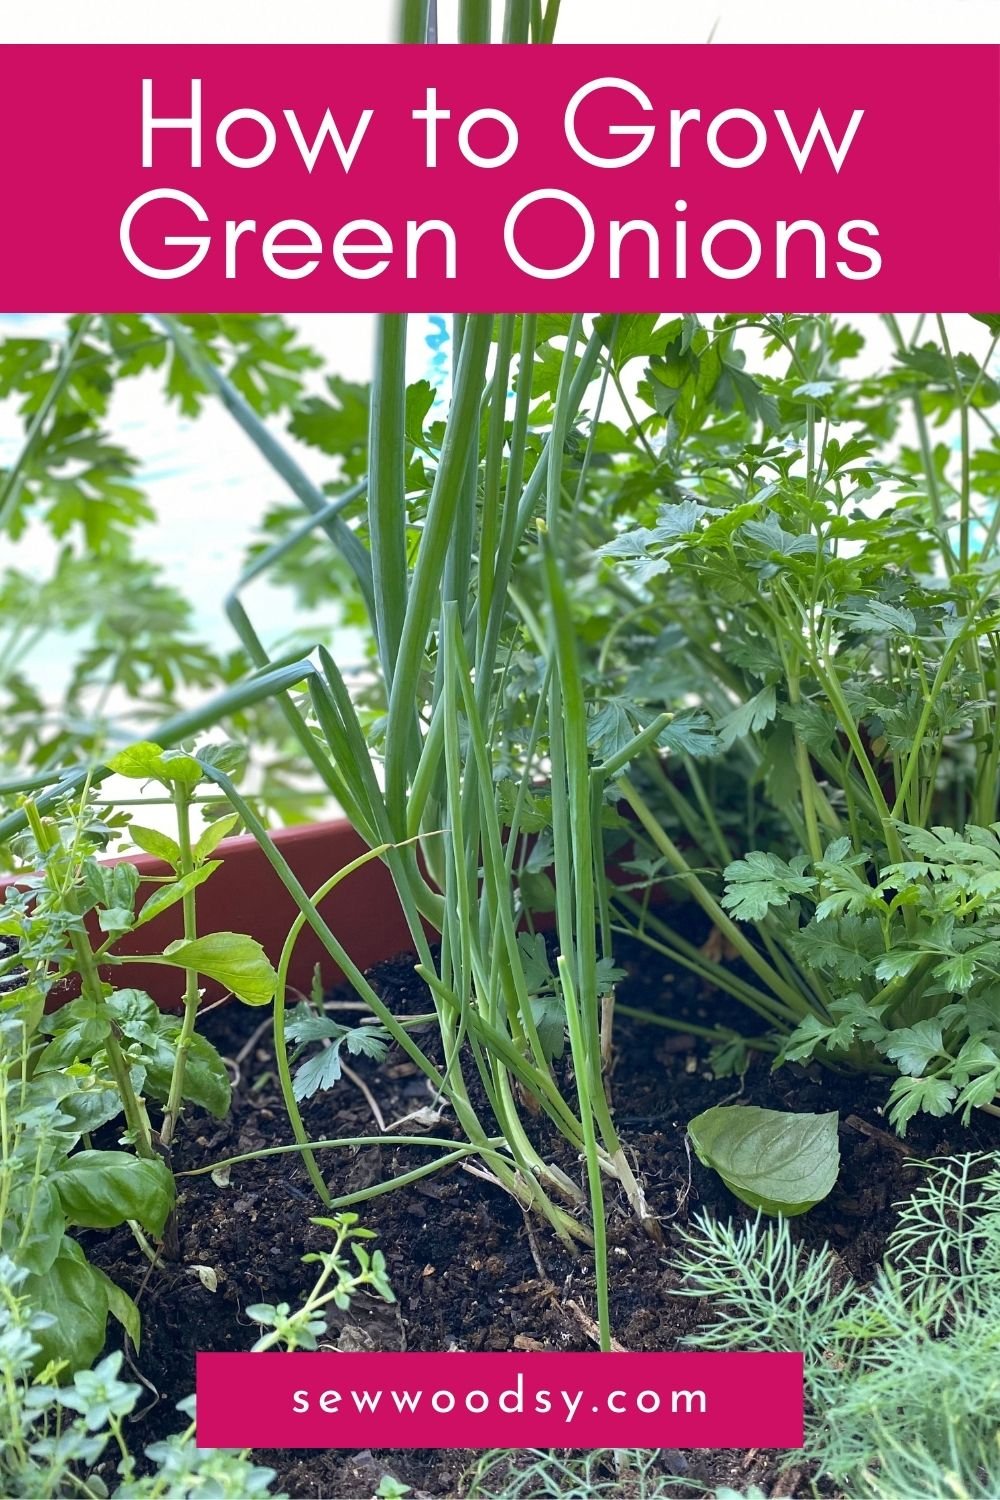 Photo of green onions in a planter with text on image for Pinterest.